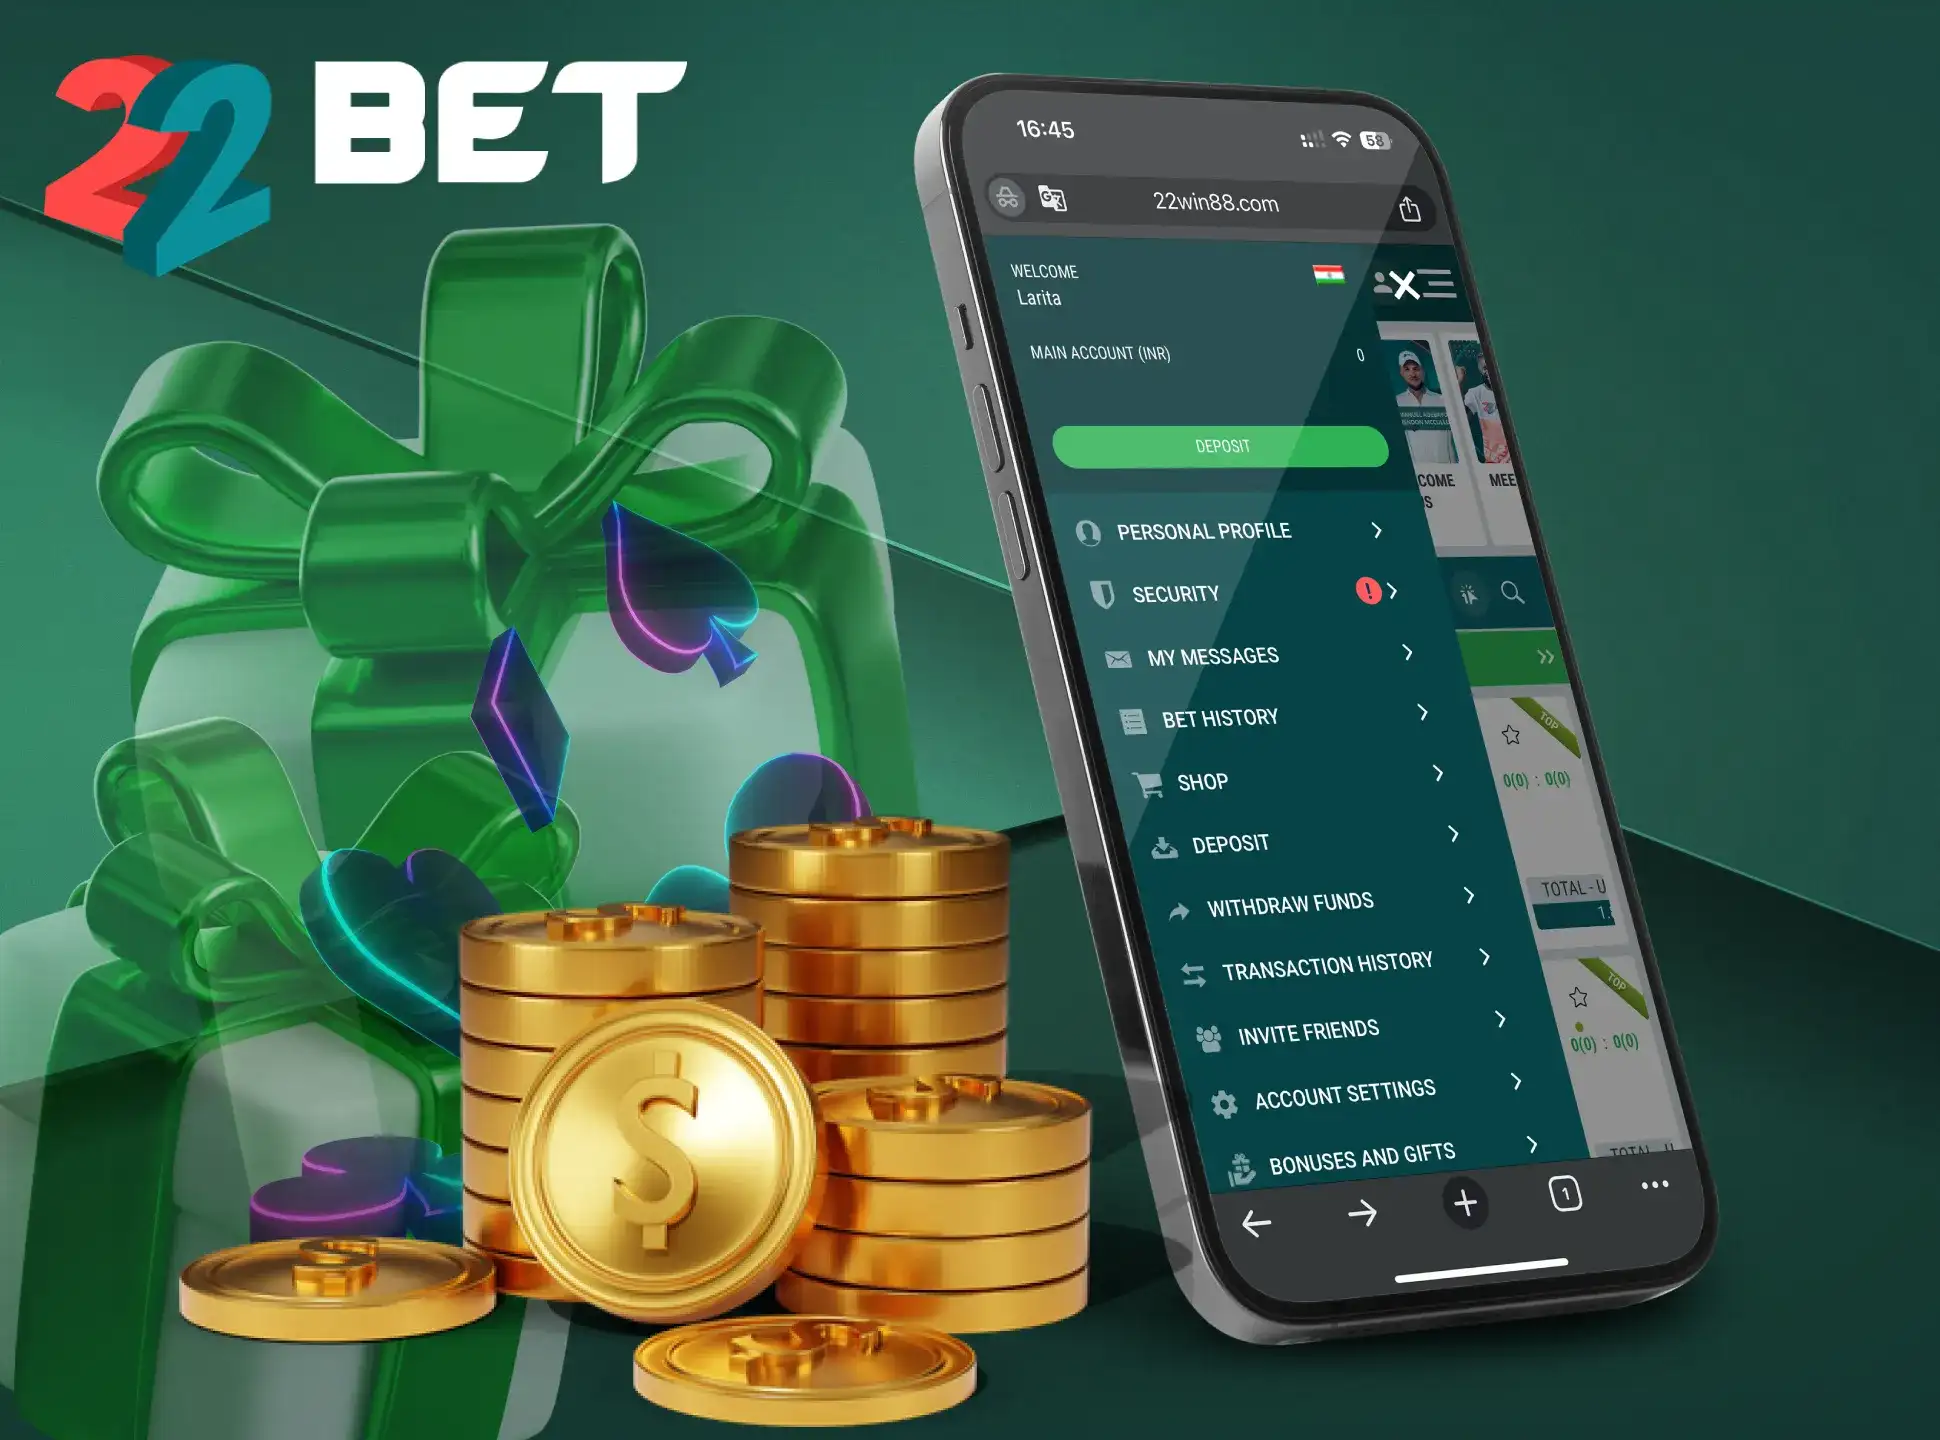 Once the money is deposited into your account, you can start betting.